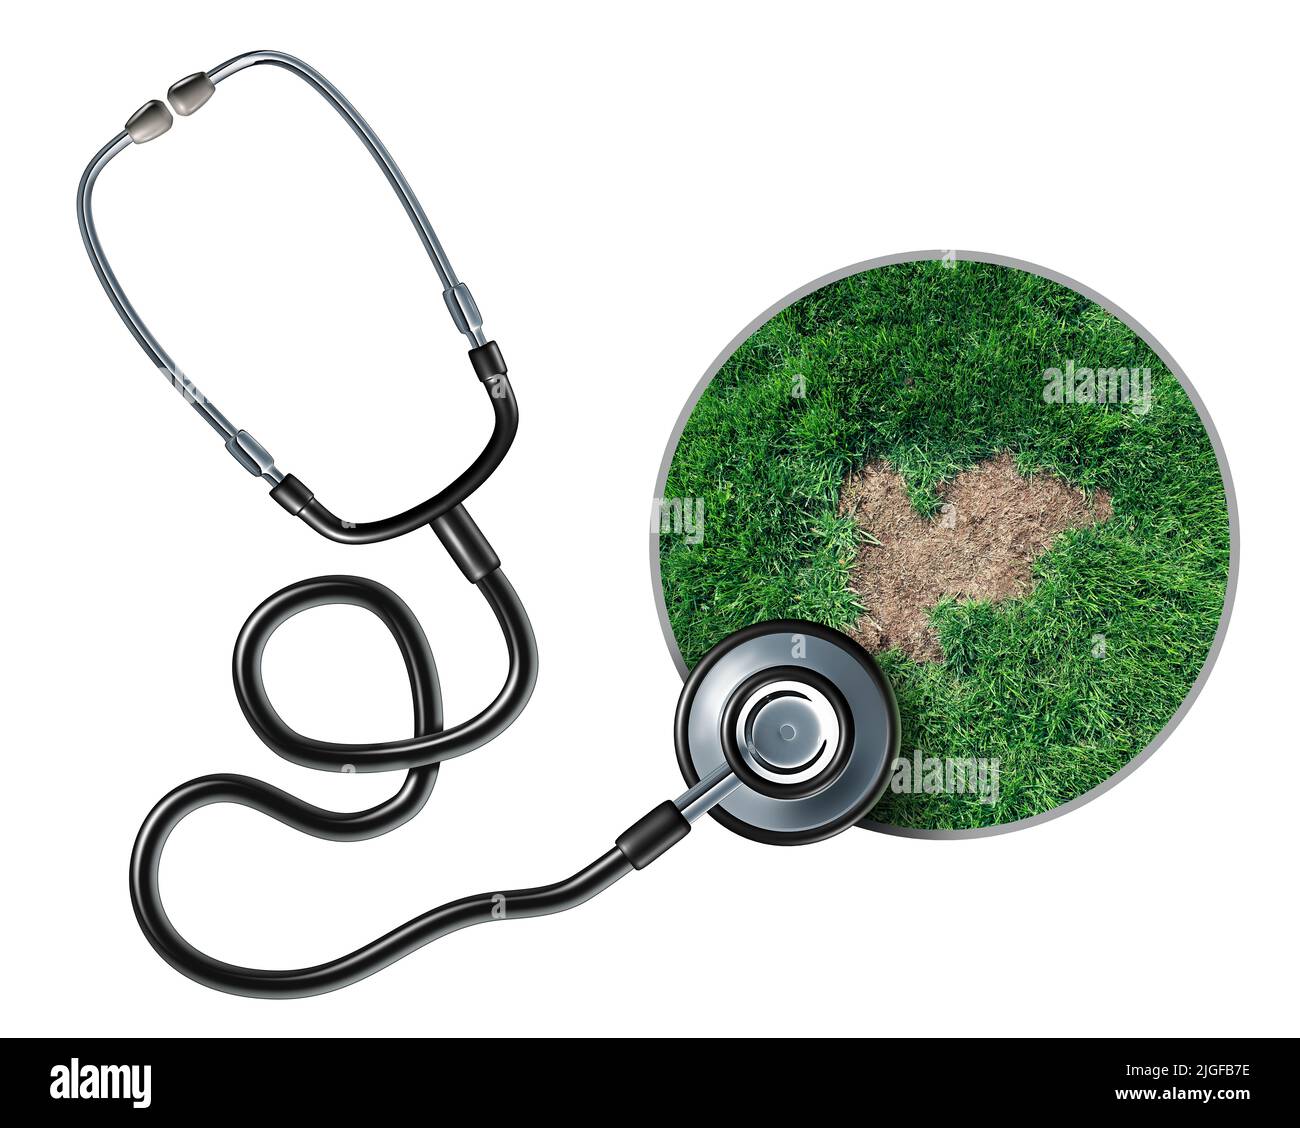 Lawn care health and grub damage as damaged grass roots causing a brown patch disease in the turf as a specialist stethoscope to diagnose. Stock Photo